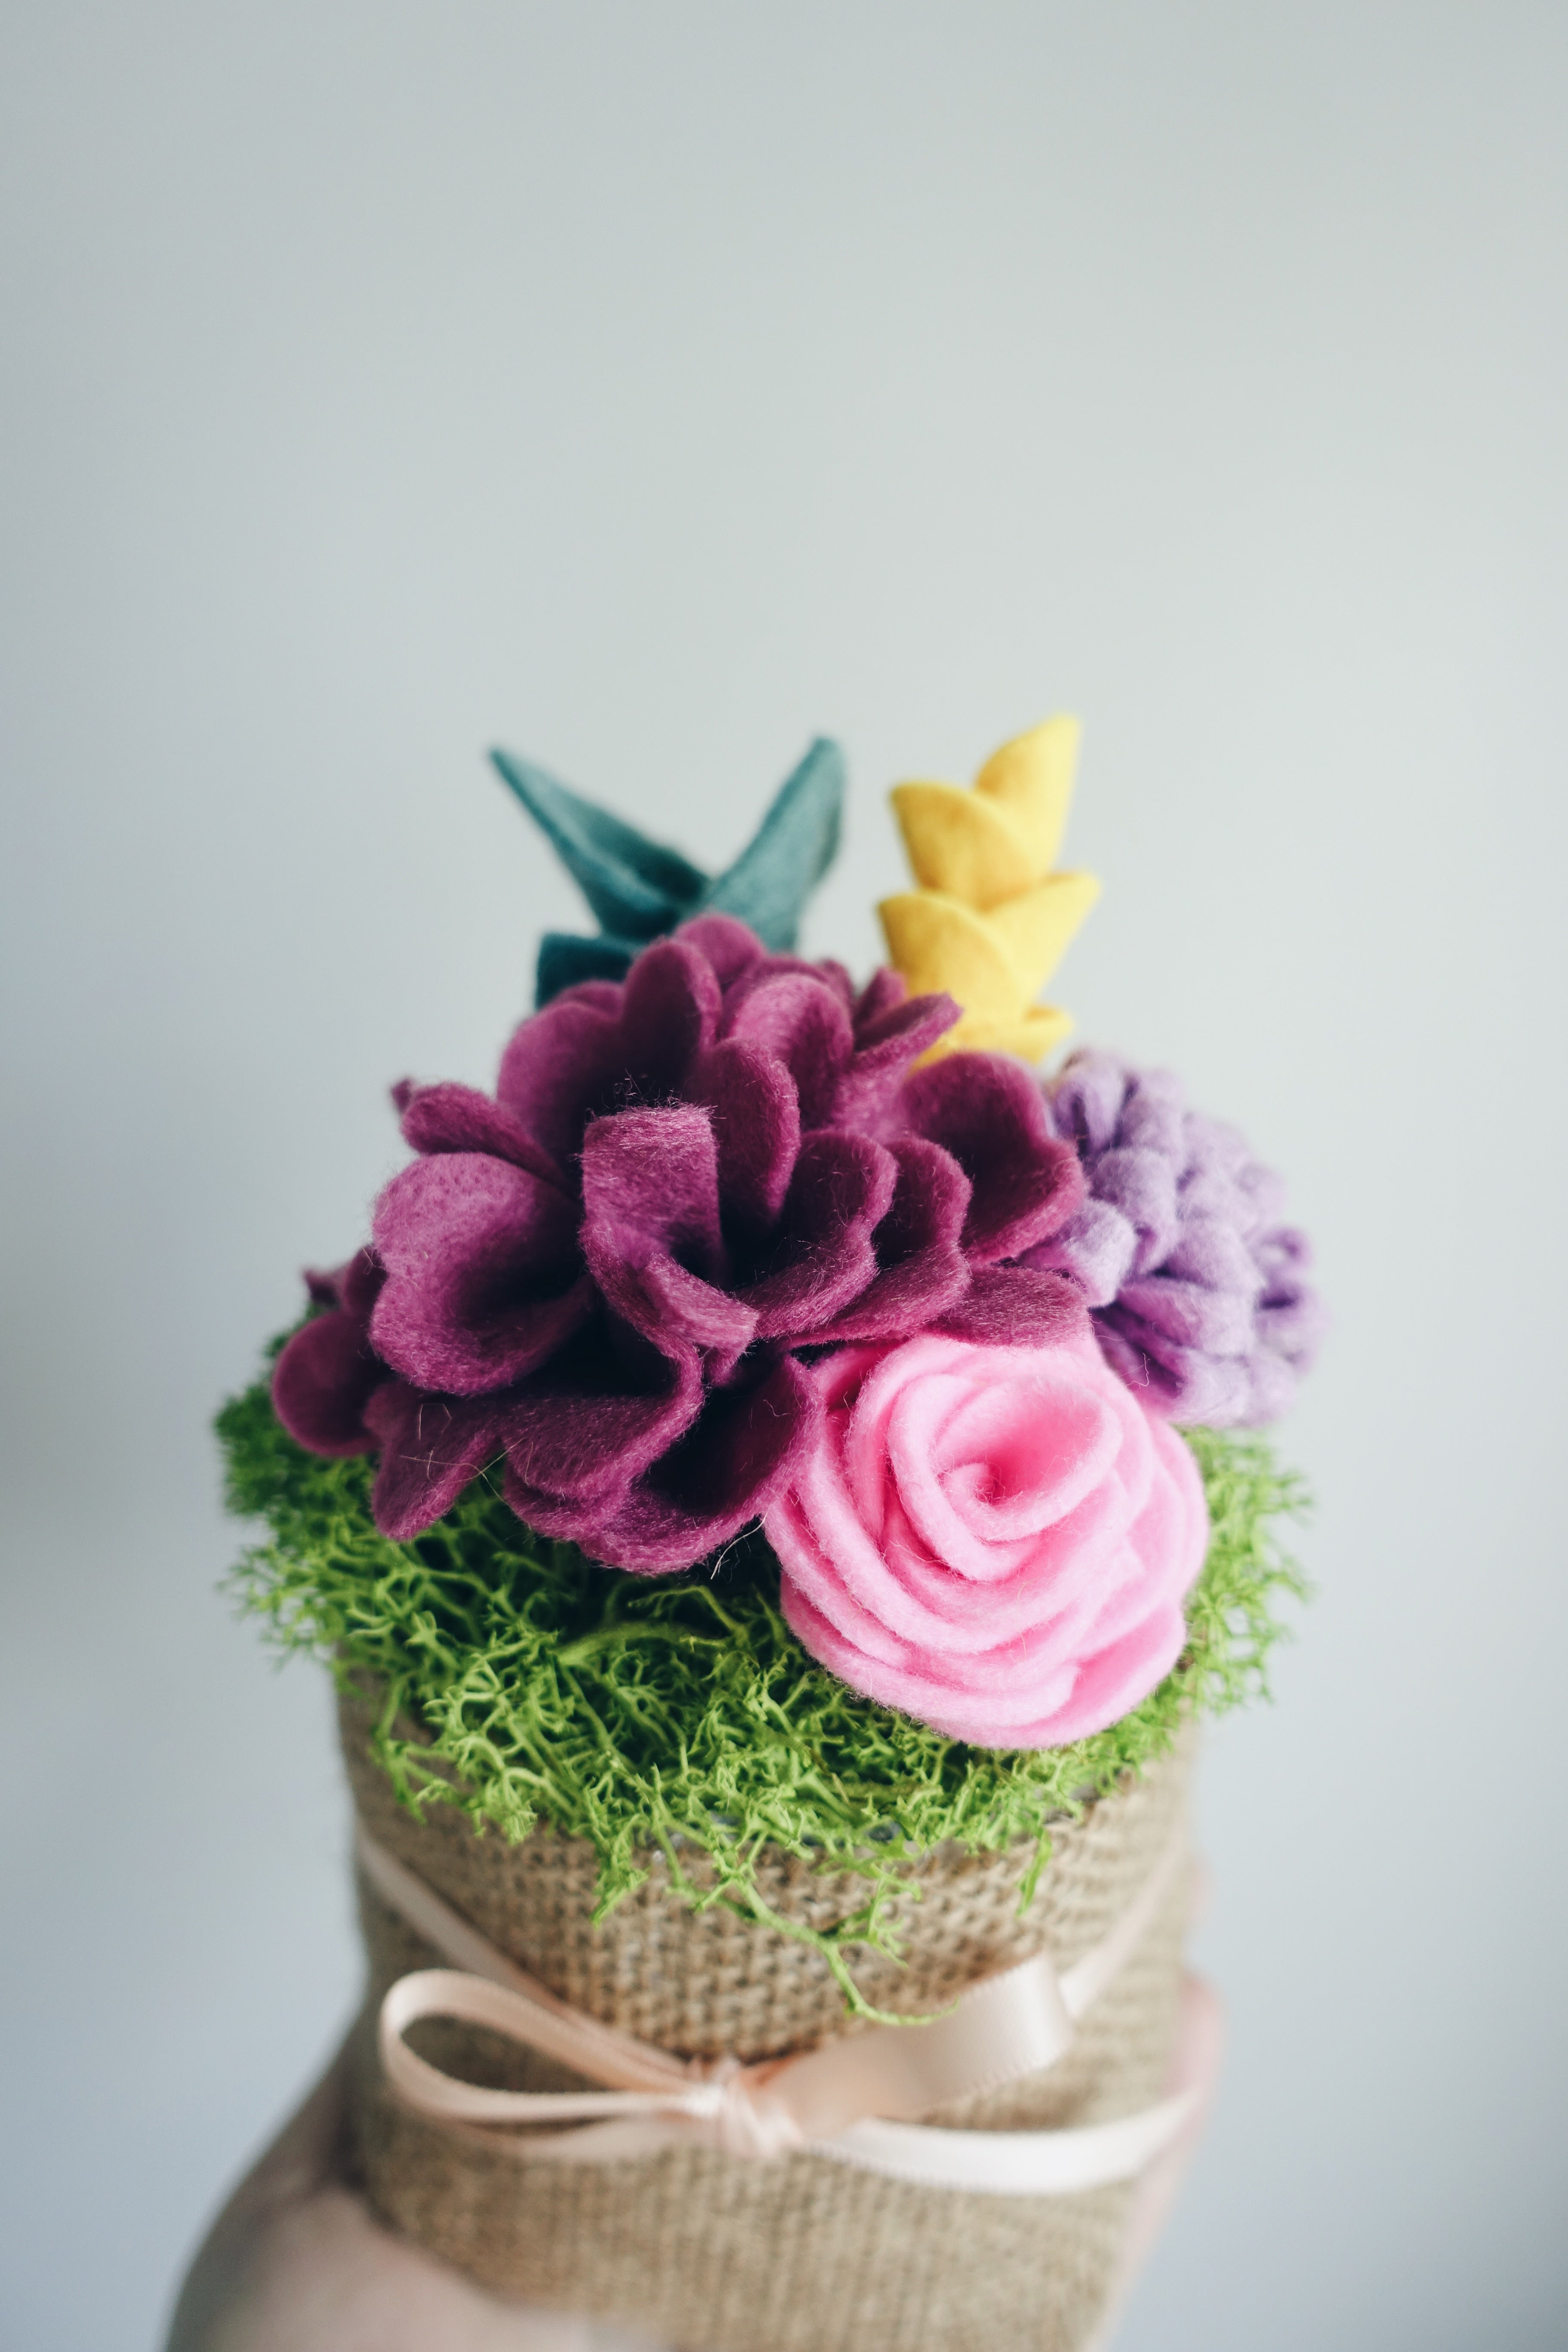 ROCKONLINE | New Creation Church | NCC | Joseph Prince | Mini Felt Flowers | Promises | Mother's Day | Christian Gifts | Small Gifts | Rock Bookshop | Rock Bookstore | Star Vista | Free Delivery for Singapore Orders above $50.